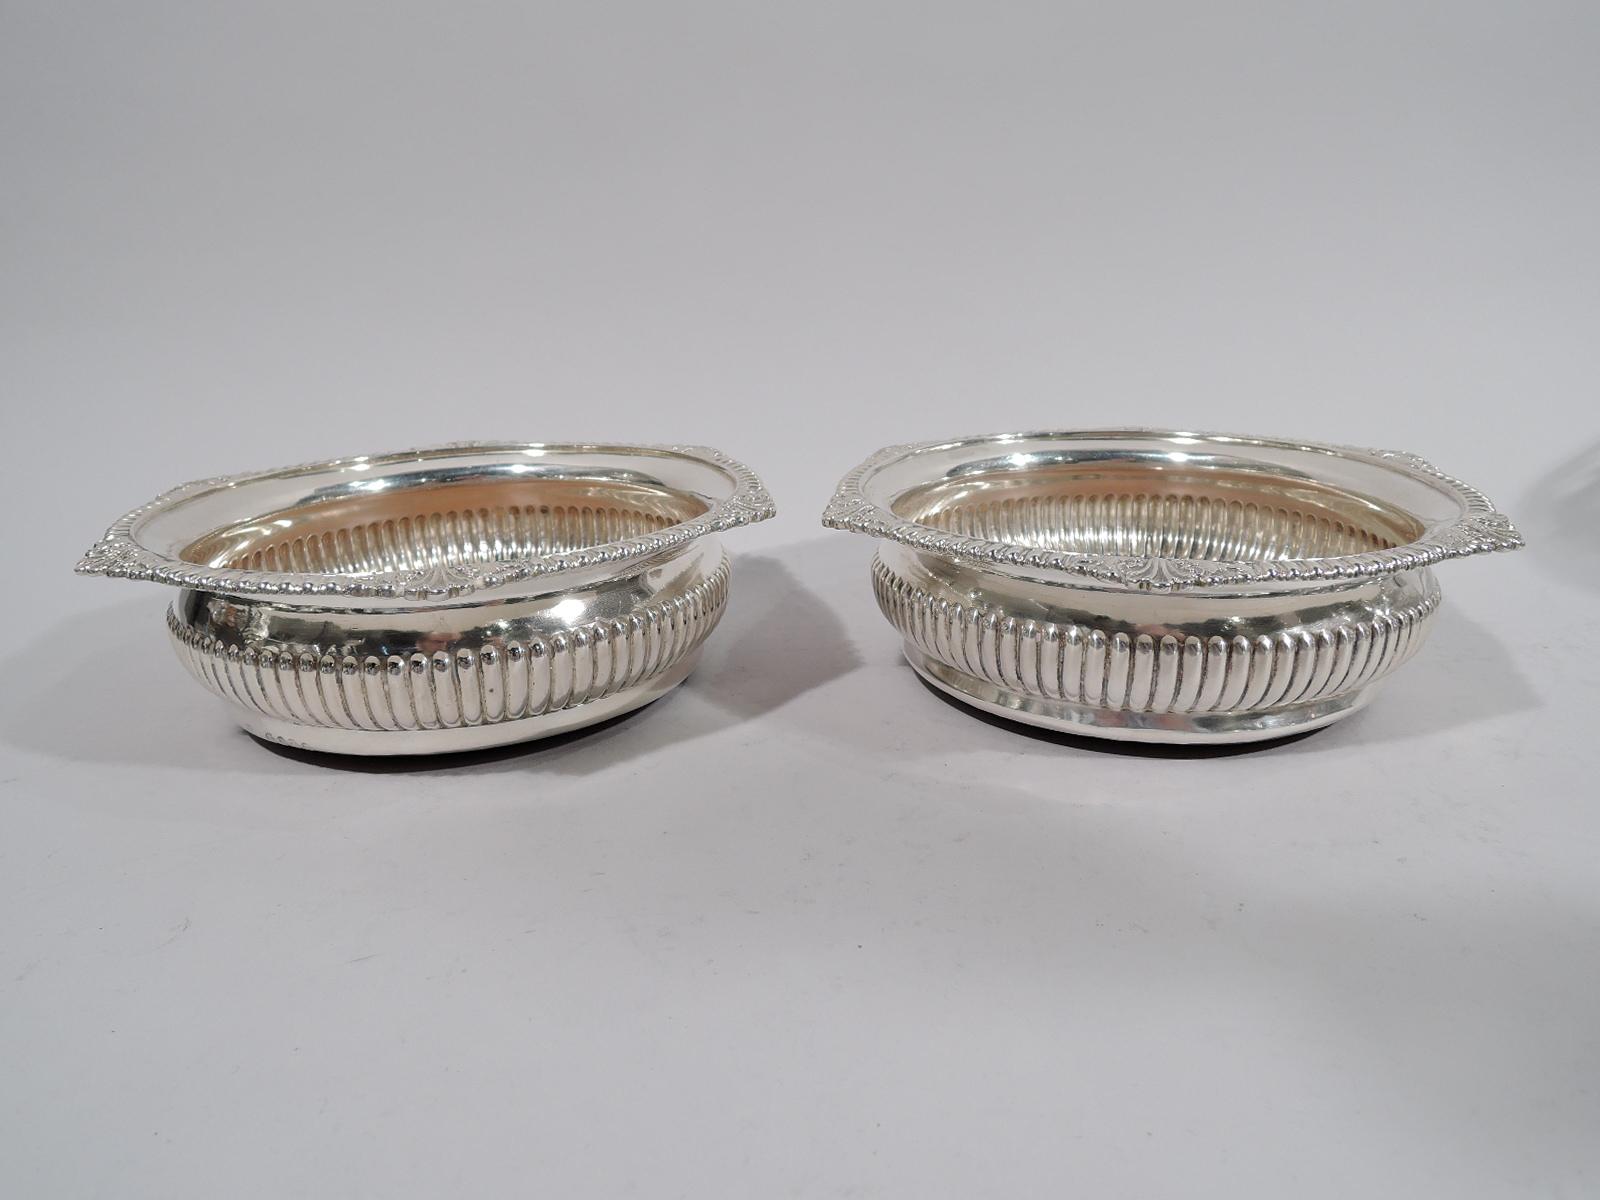 Pair of George III sterling silver wine bottle coasters, 1818. Each: Bellied with horizontal ribbing. Everted egg-and-dart rim interspersed with leaves and shells. Interior stained wood; central sterling silver medallion has engraved armorial.